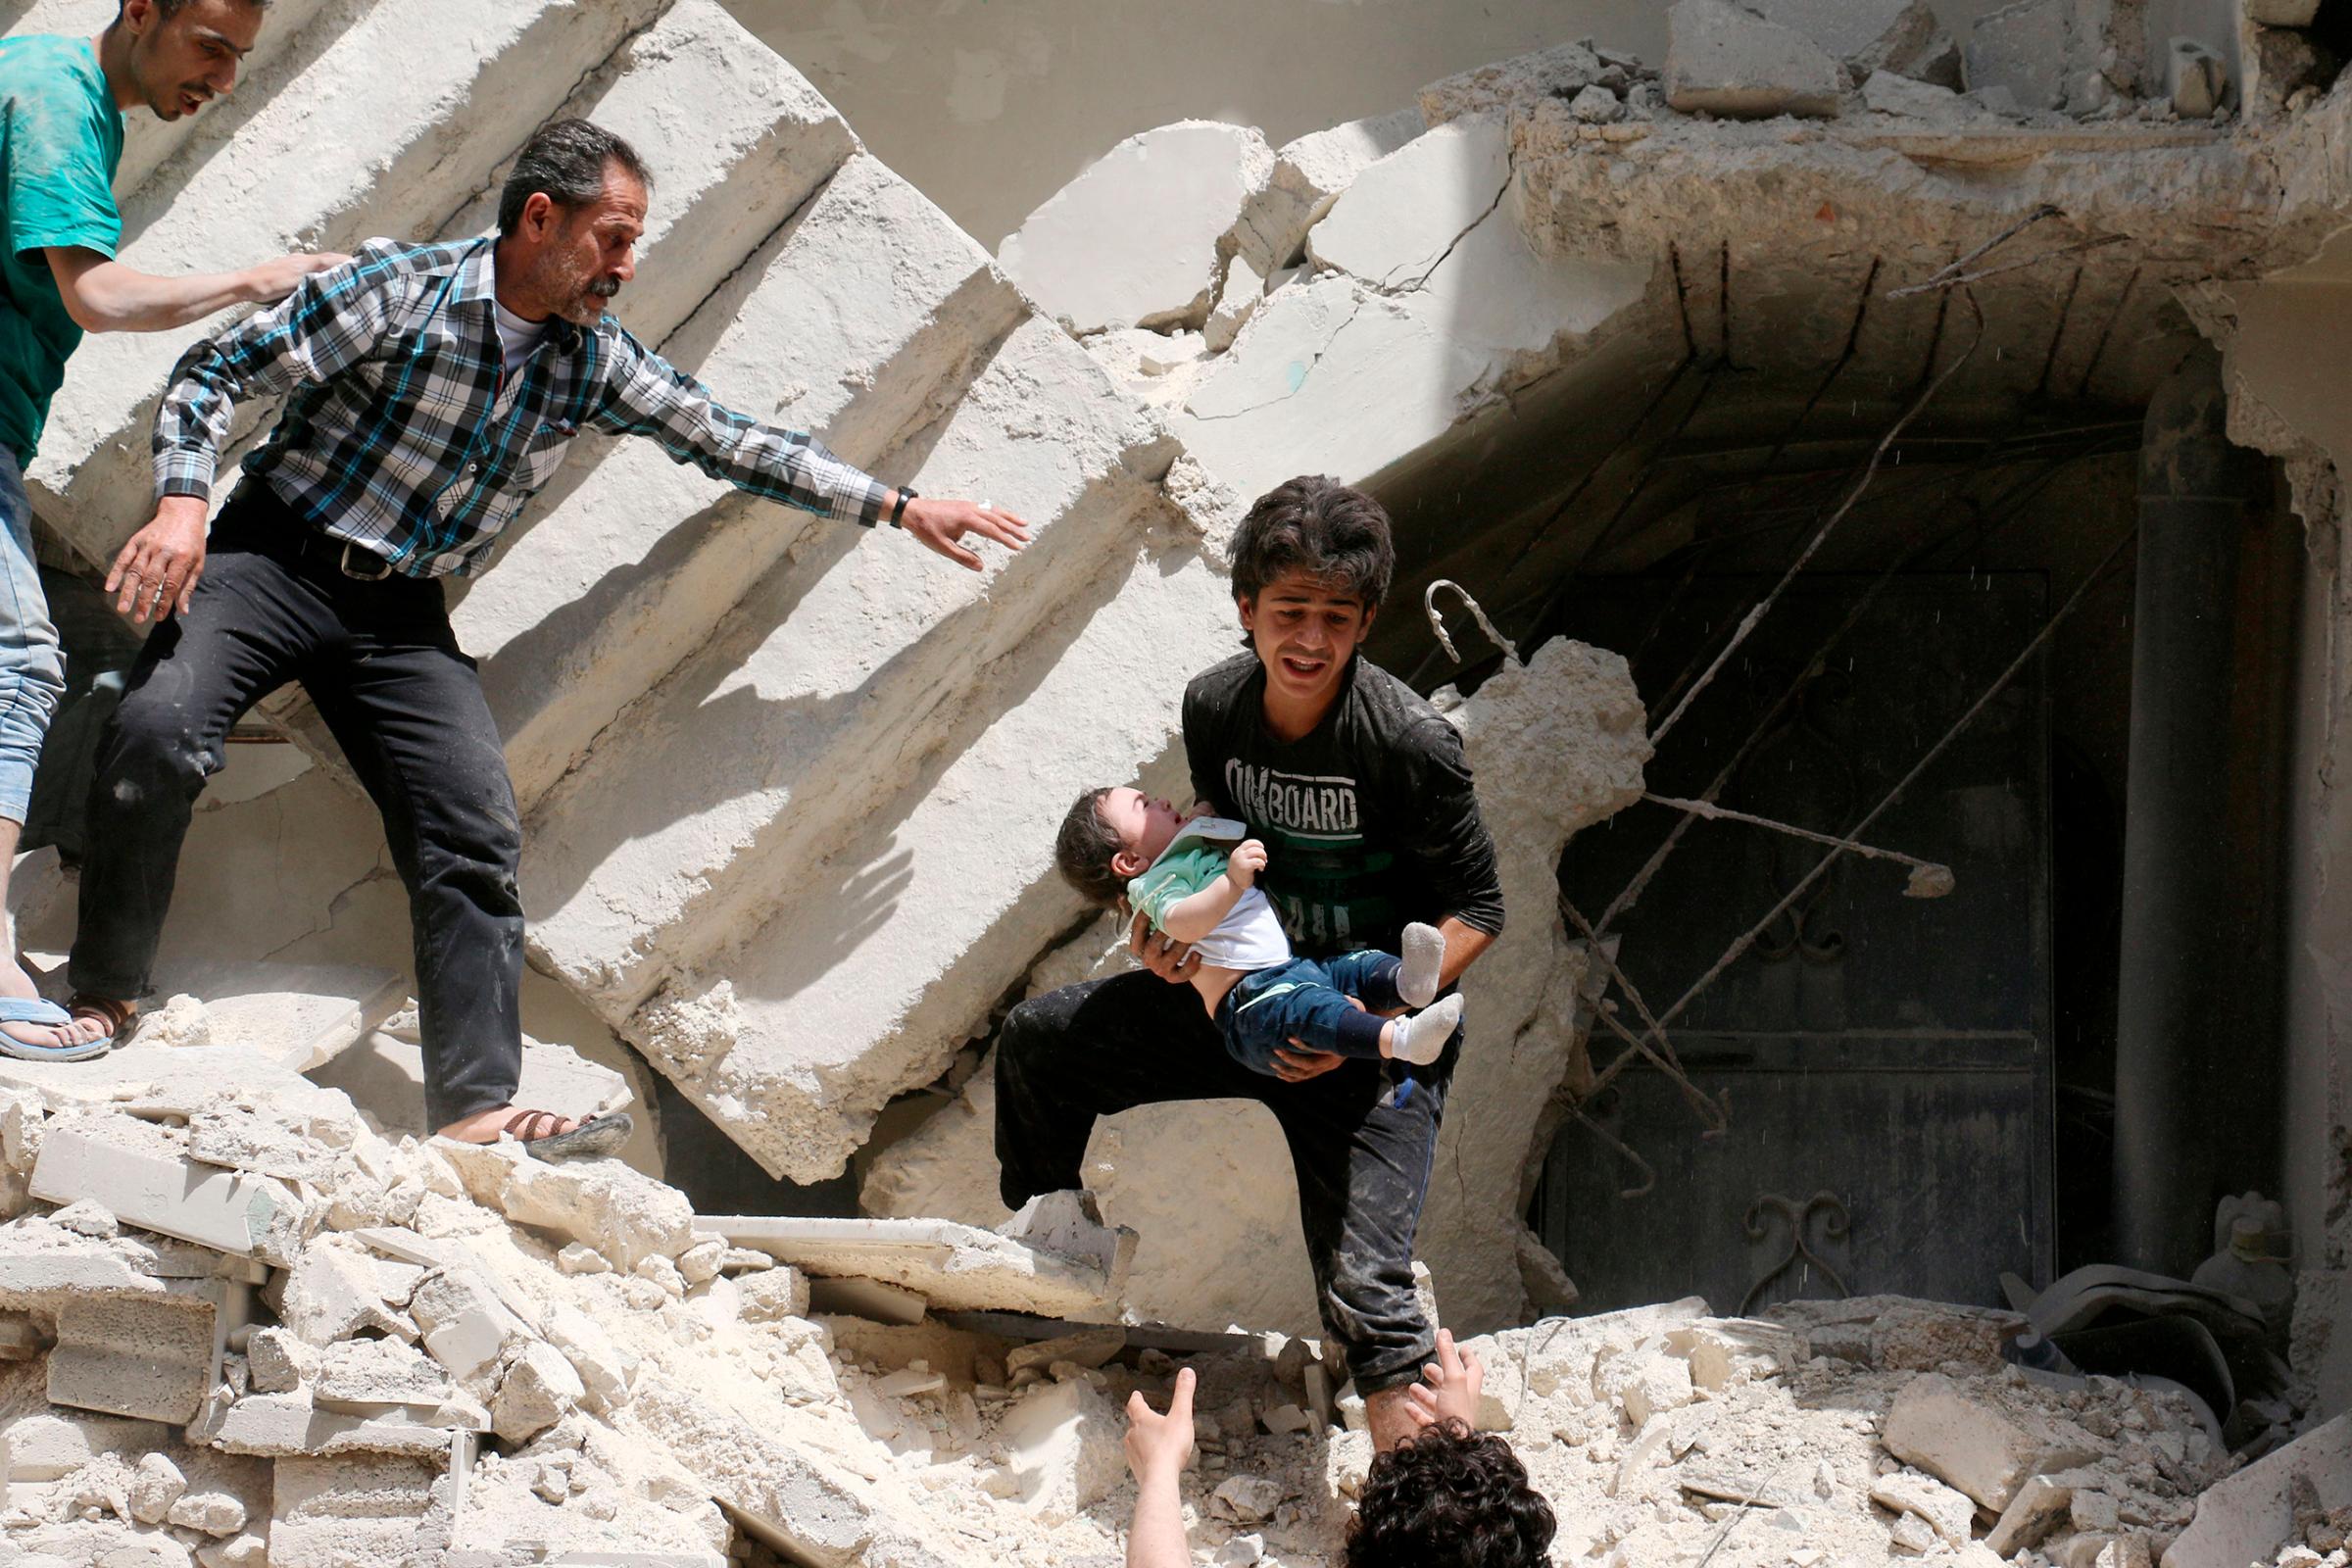 A toddler is evacuated from a destroyed building following a reported airstrike on a rebel-held neighborhood in Aleppo, Syria, April 28, 2016.